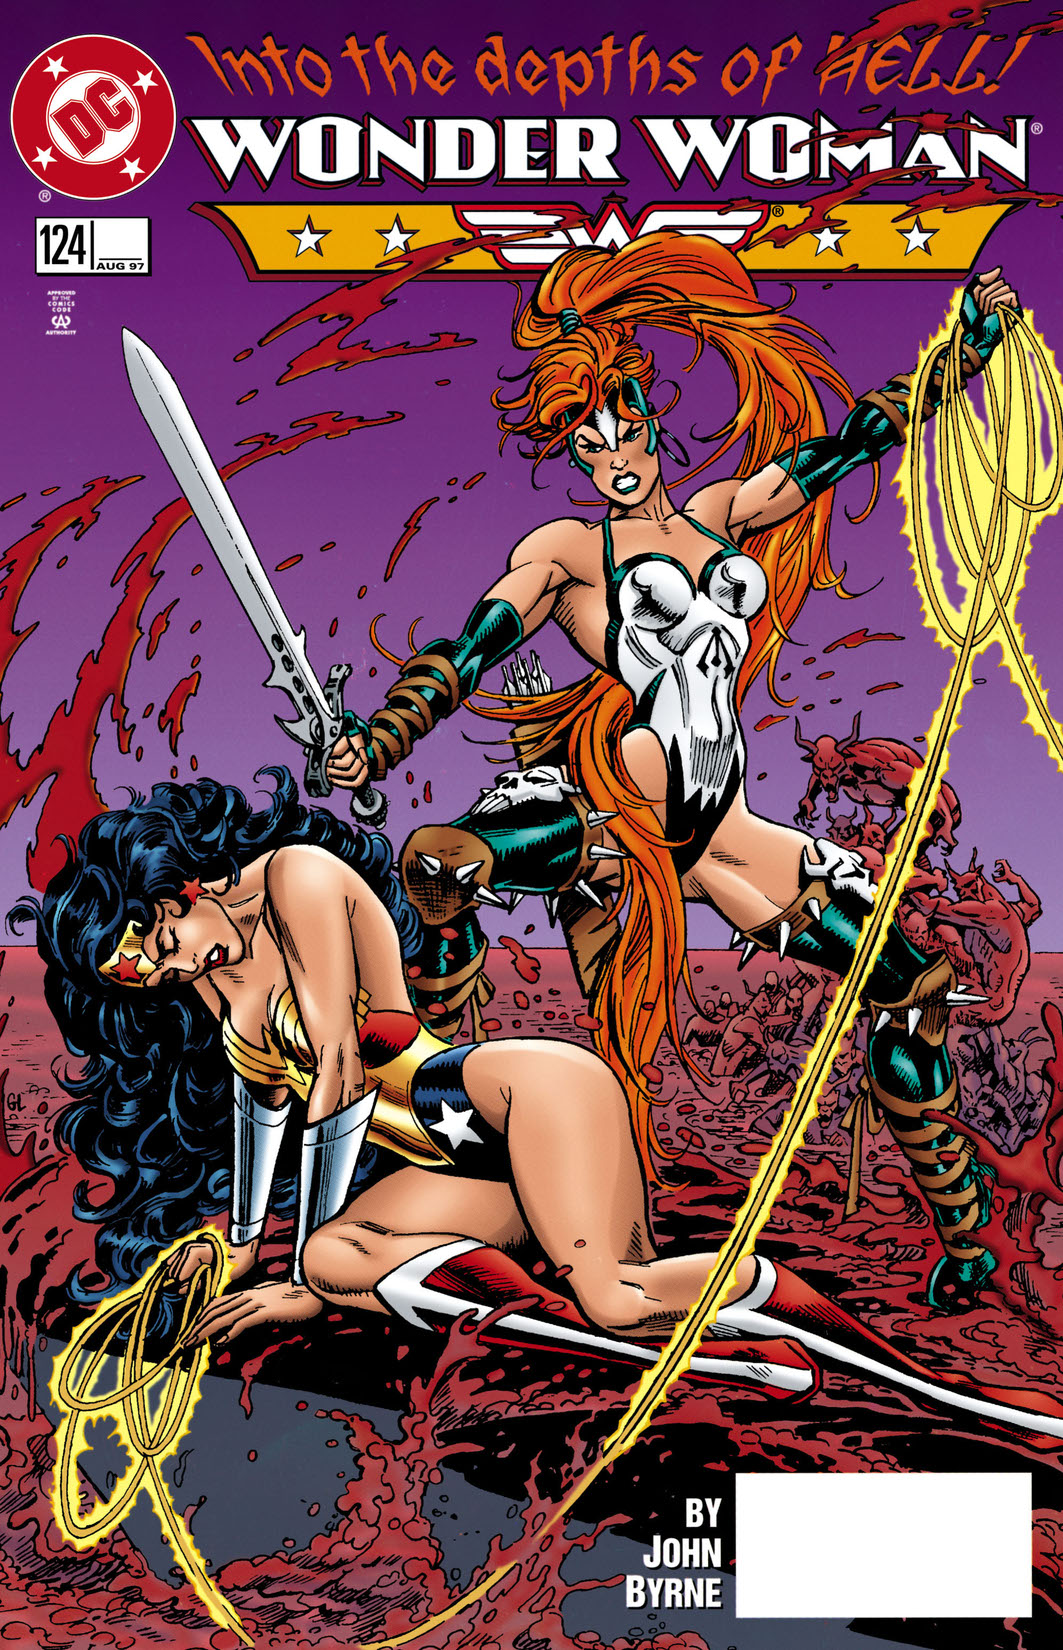 Wonder Woman (1986-) #124 preview images